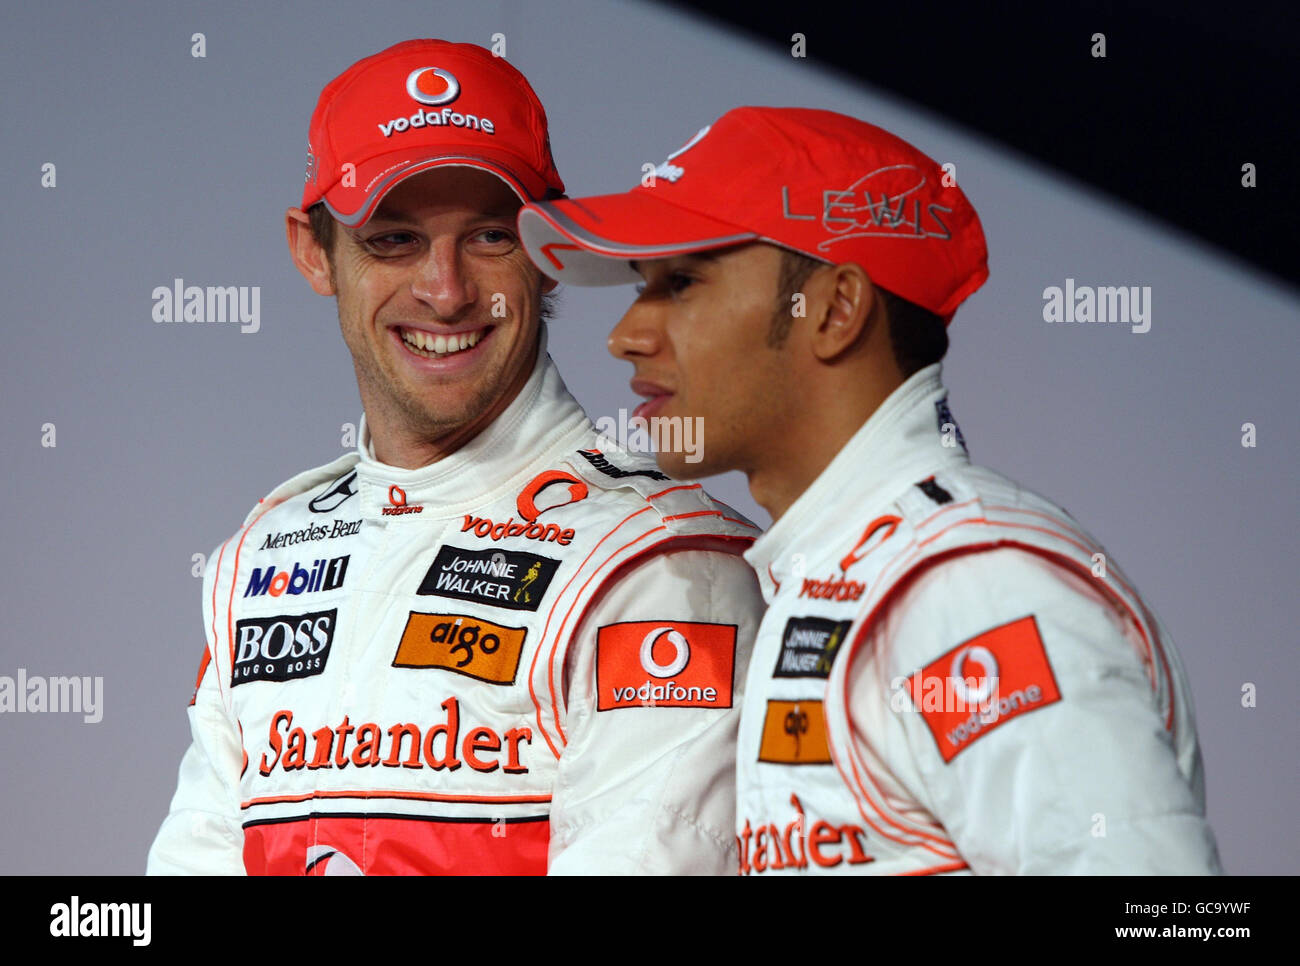 McLaren Mercedes drivers Jenson Button and Lewis Hamilton during the launch  of the Vodafone McLaren Mercedes MP4-25 F1 Car at the McLaren Mercedes team  headquarters, Newbury Stock Photo - Alamy